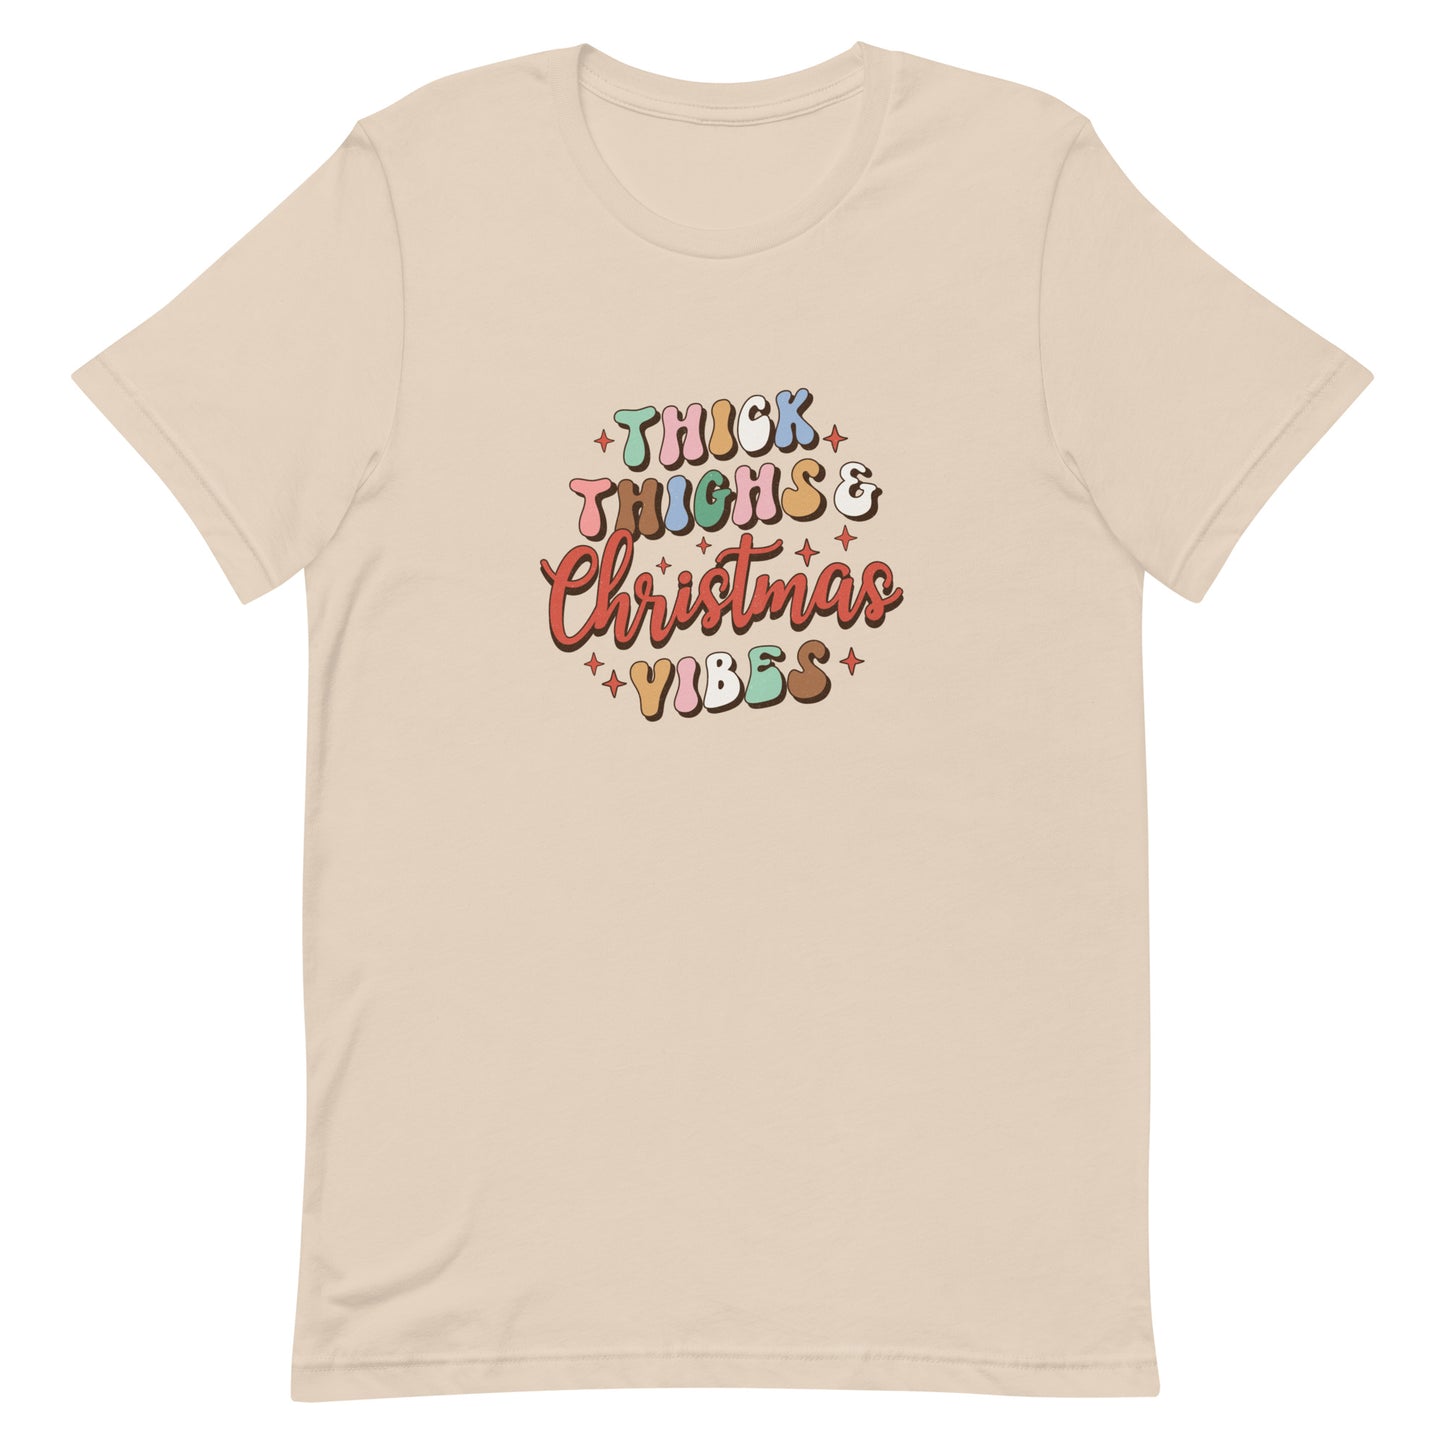 Thick Thighs & Christmas Vibes Unisex t-shirt